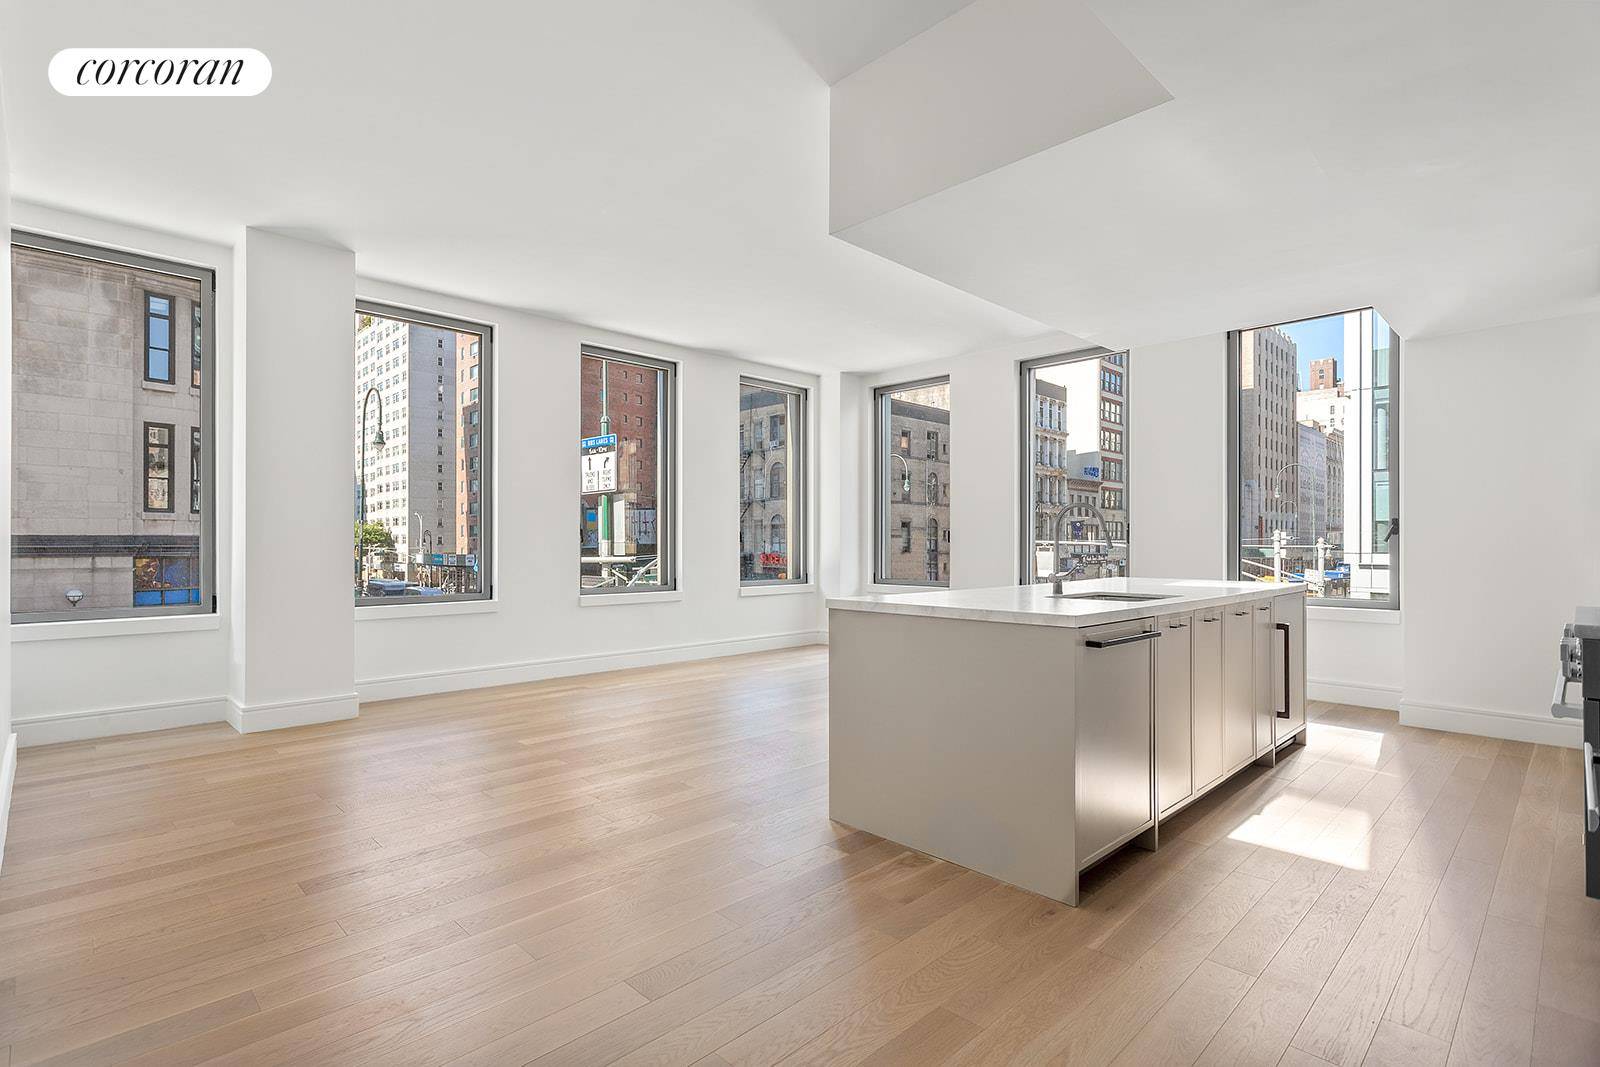 Be the first to live in the spectacular 2 bedroom, 2 bathroom residence with unparalleled Southern and Western exposures, 10' ceilings and beautiful 5 white oak flooring throughout.